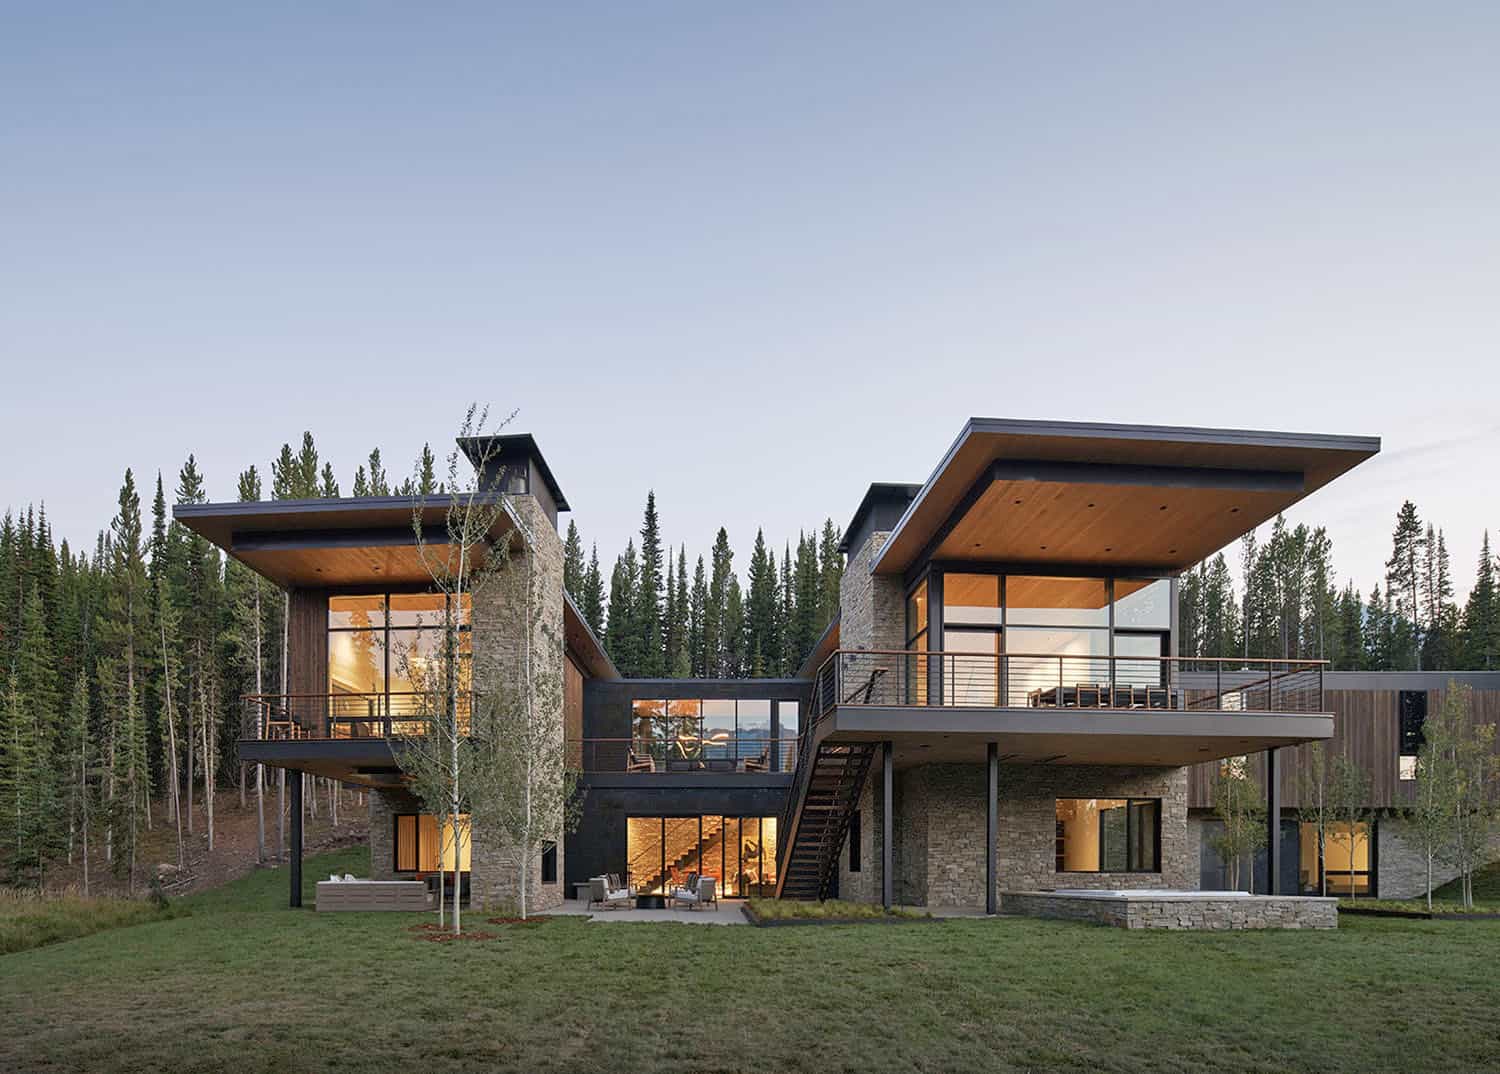 Escape to this spectacular mountain retreat in Big Sky Country